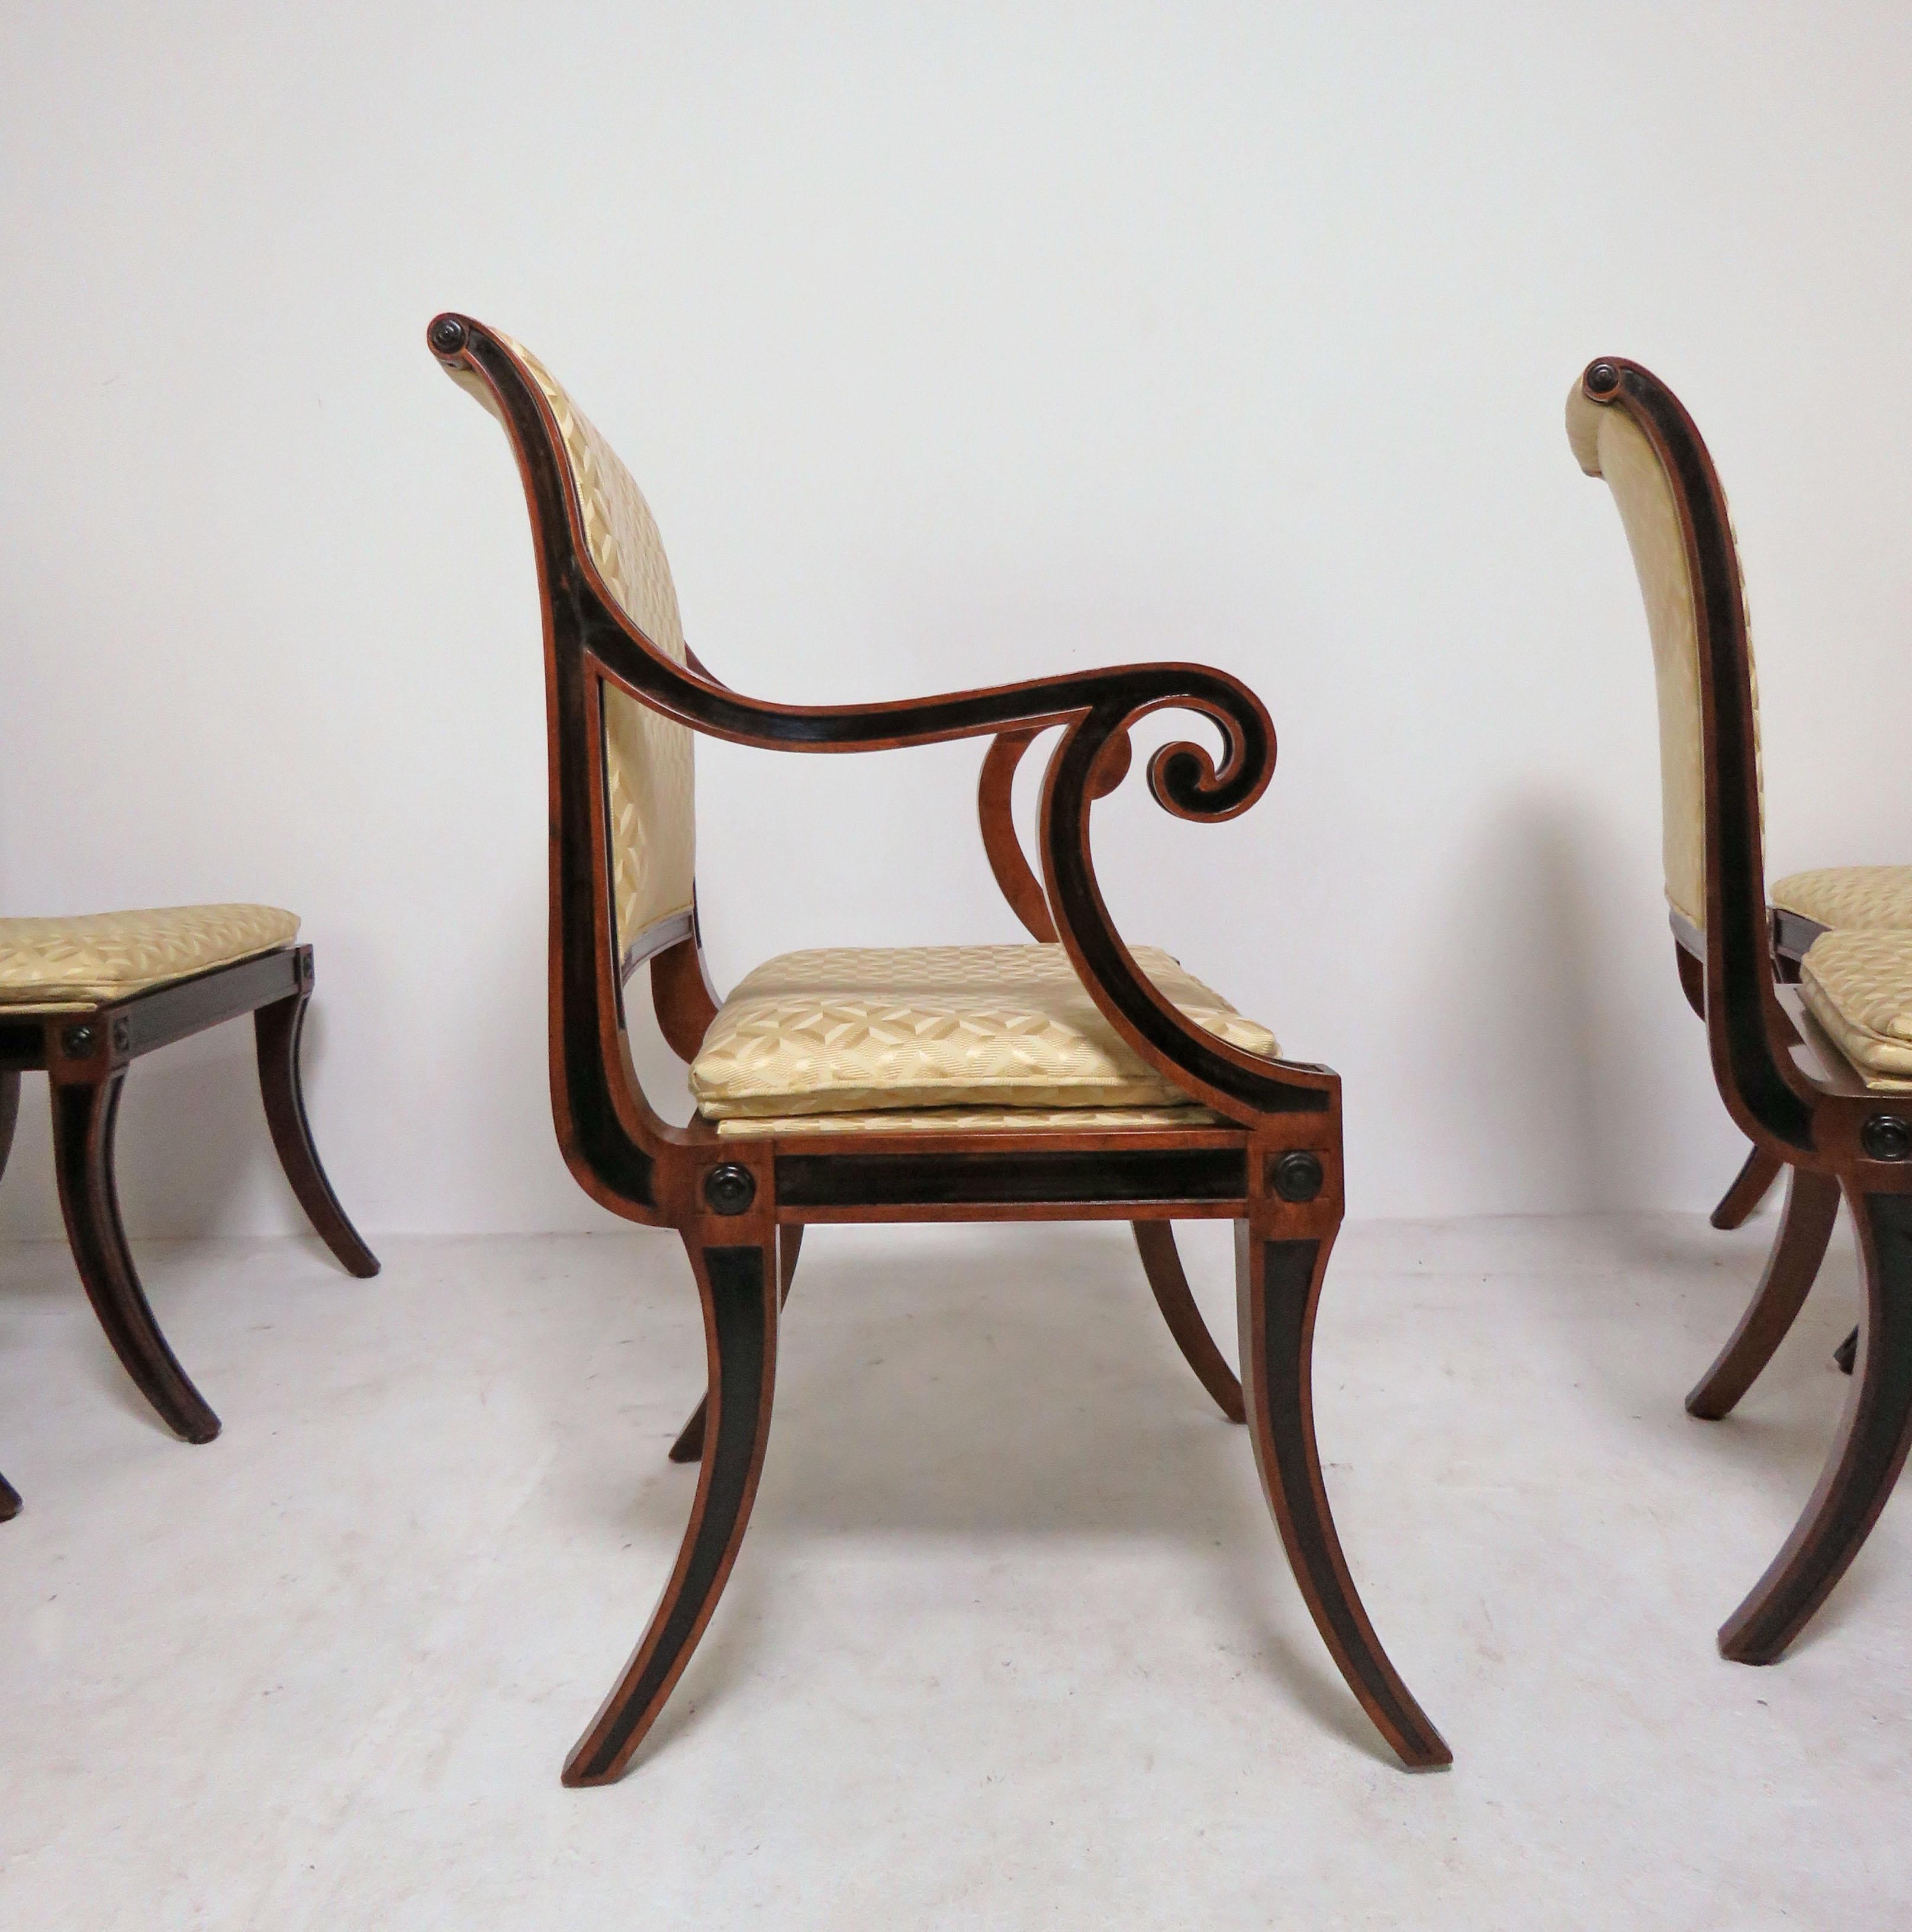 A set of eight regency style dining chairs by Baker furniture, circa 1960s. The British regency period was most notably influenced by the exotic Greek, Egyptian and Asian furniture to which visitors at London’s new public museums had begun